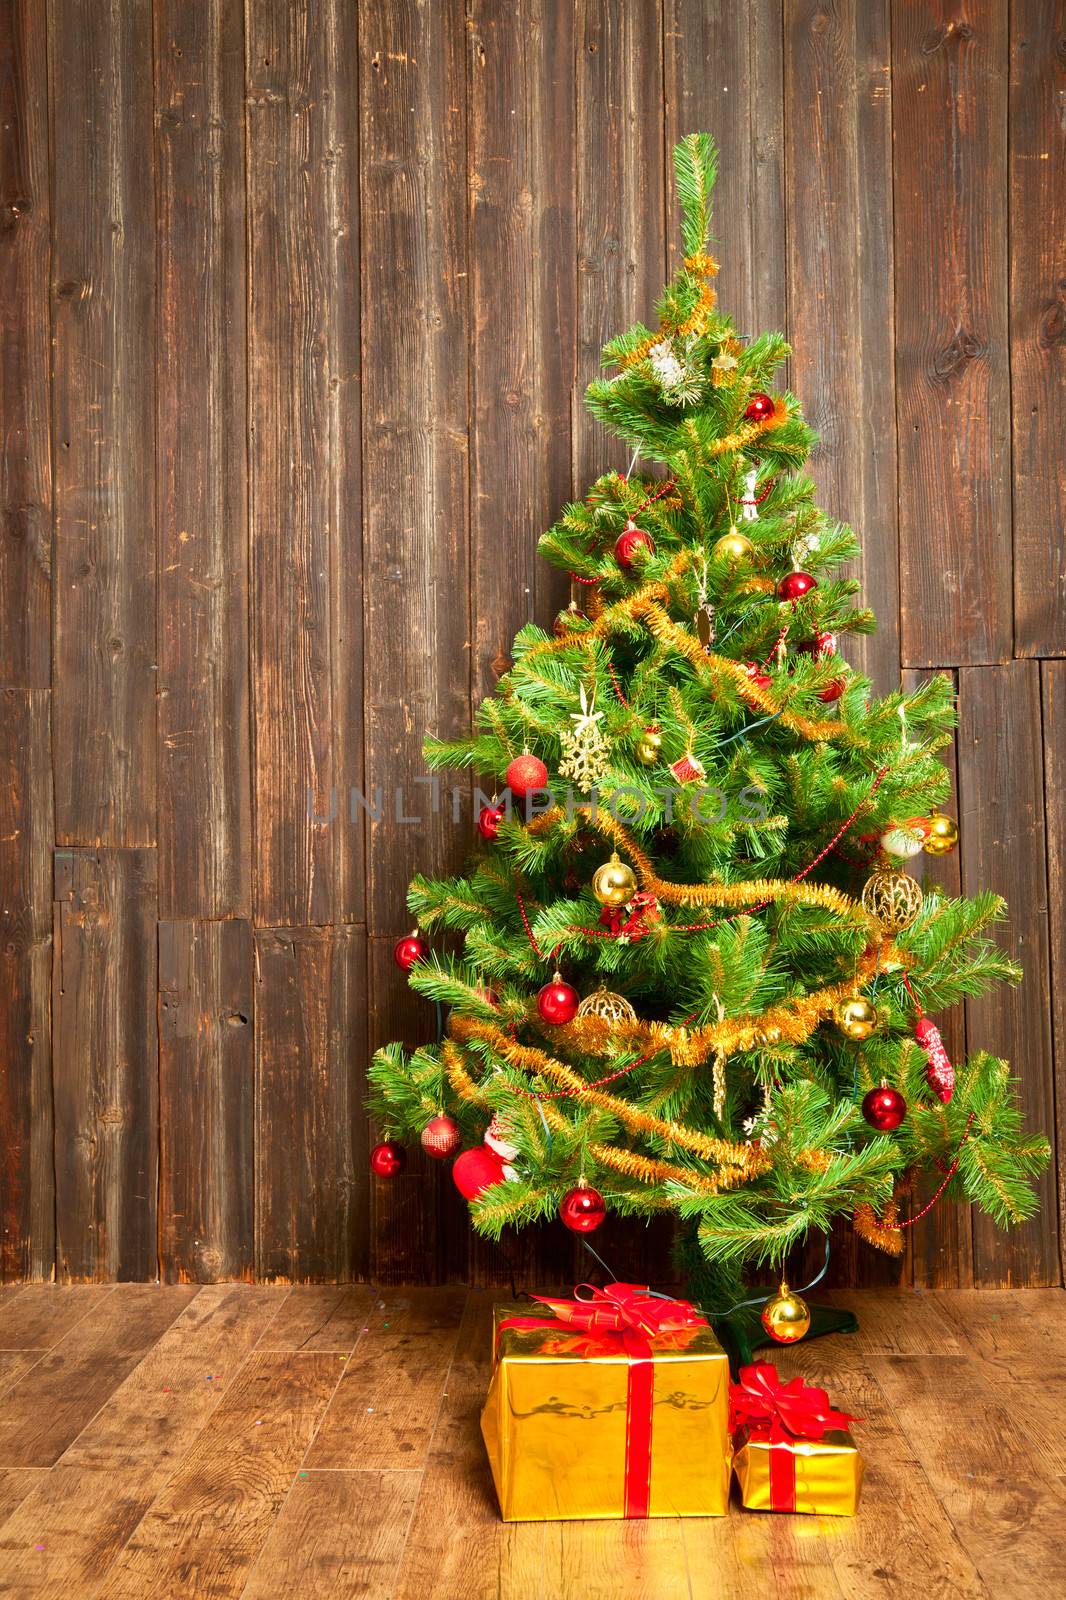 Christmas tree at weathered wooden wall